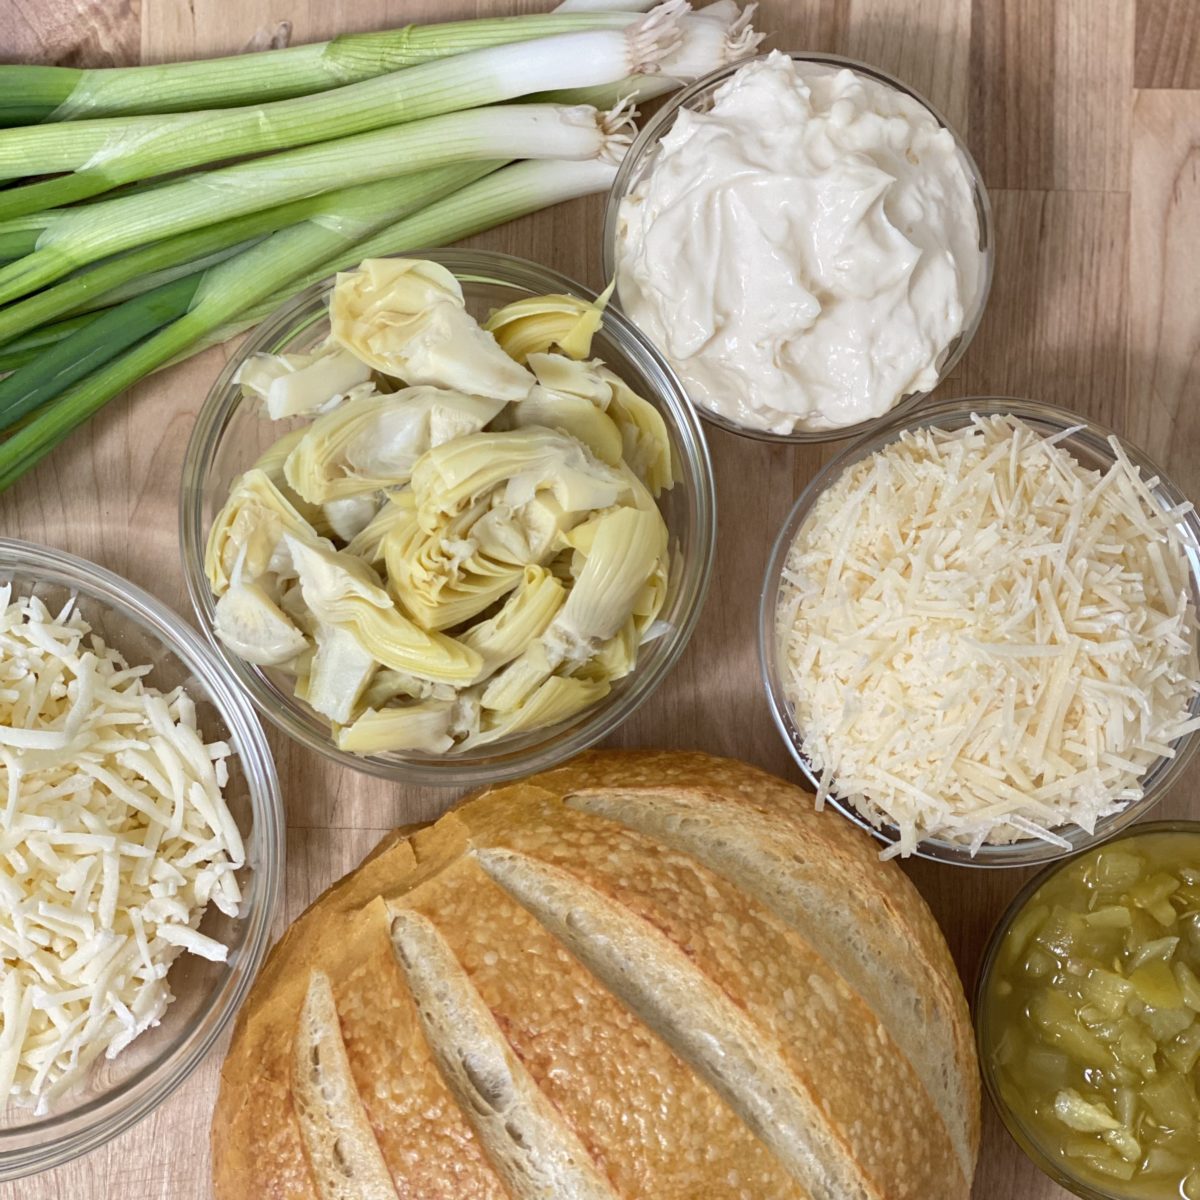 All the ingredients for the best artichoke dip recipe including, artichoke hearts, swiss cheese, parmesan cheese, mayonnaise, and green onions.